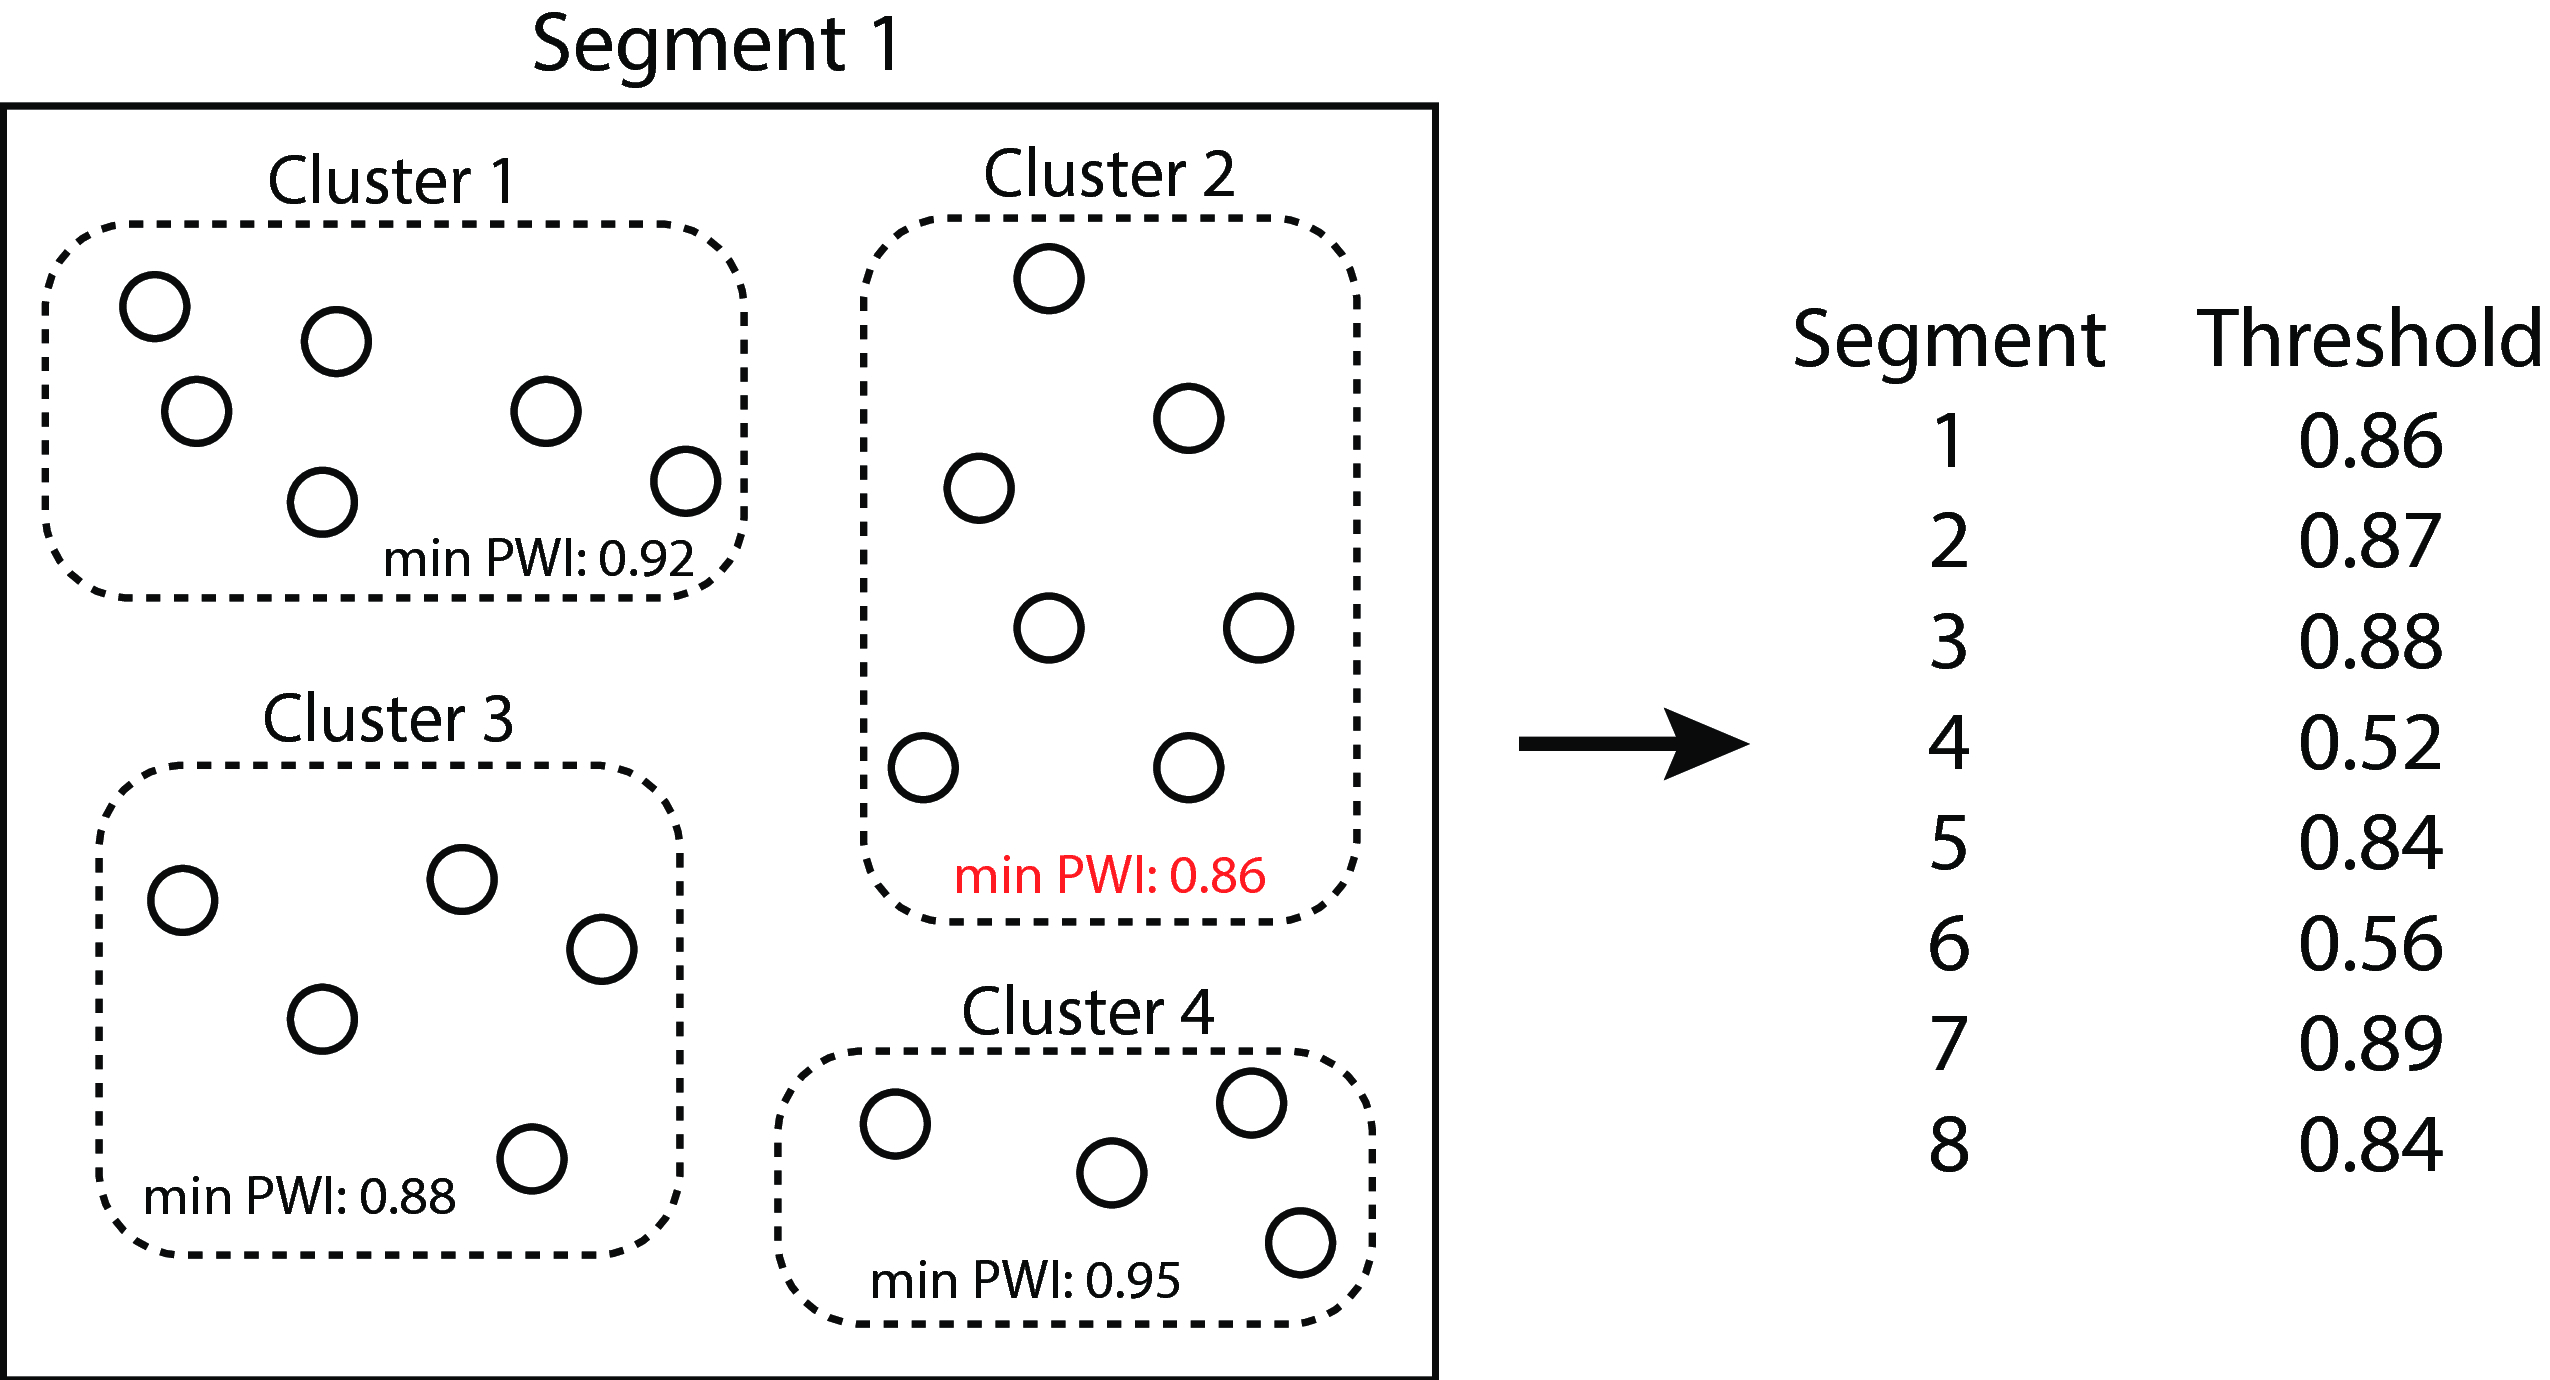 Figure 10: Schematic illustration of for the determination of thresholds. The minimum in-cluster PWI (min PWI) is shown within each cluster’s bounding box. The minimum of min PWIs is highlighted in red. Exact threshold values used for the global influenza evolution study, rounded to 2 decimal places, are shown on the right.